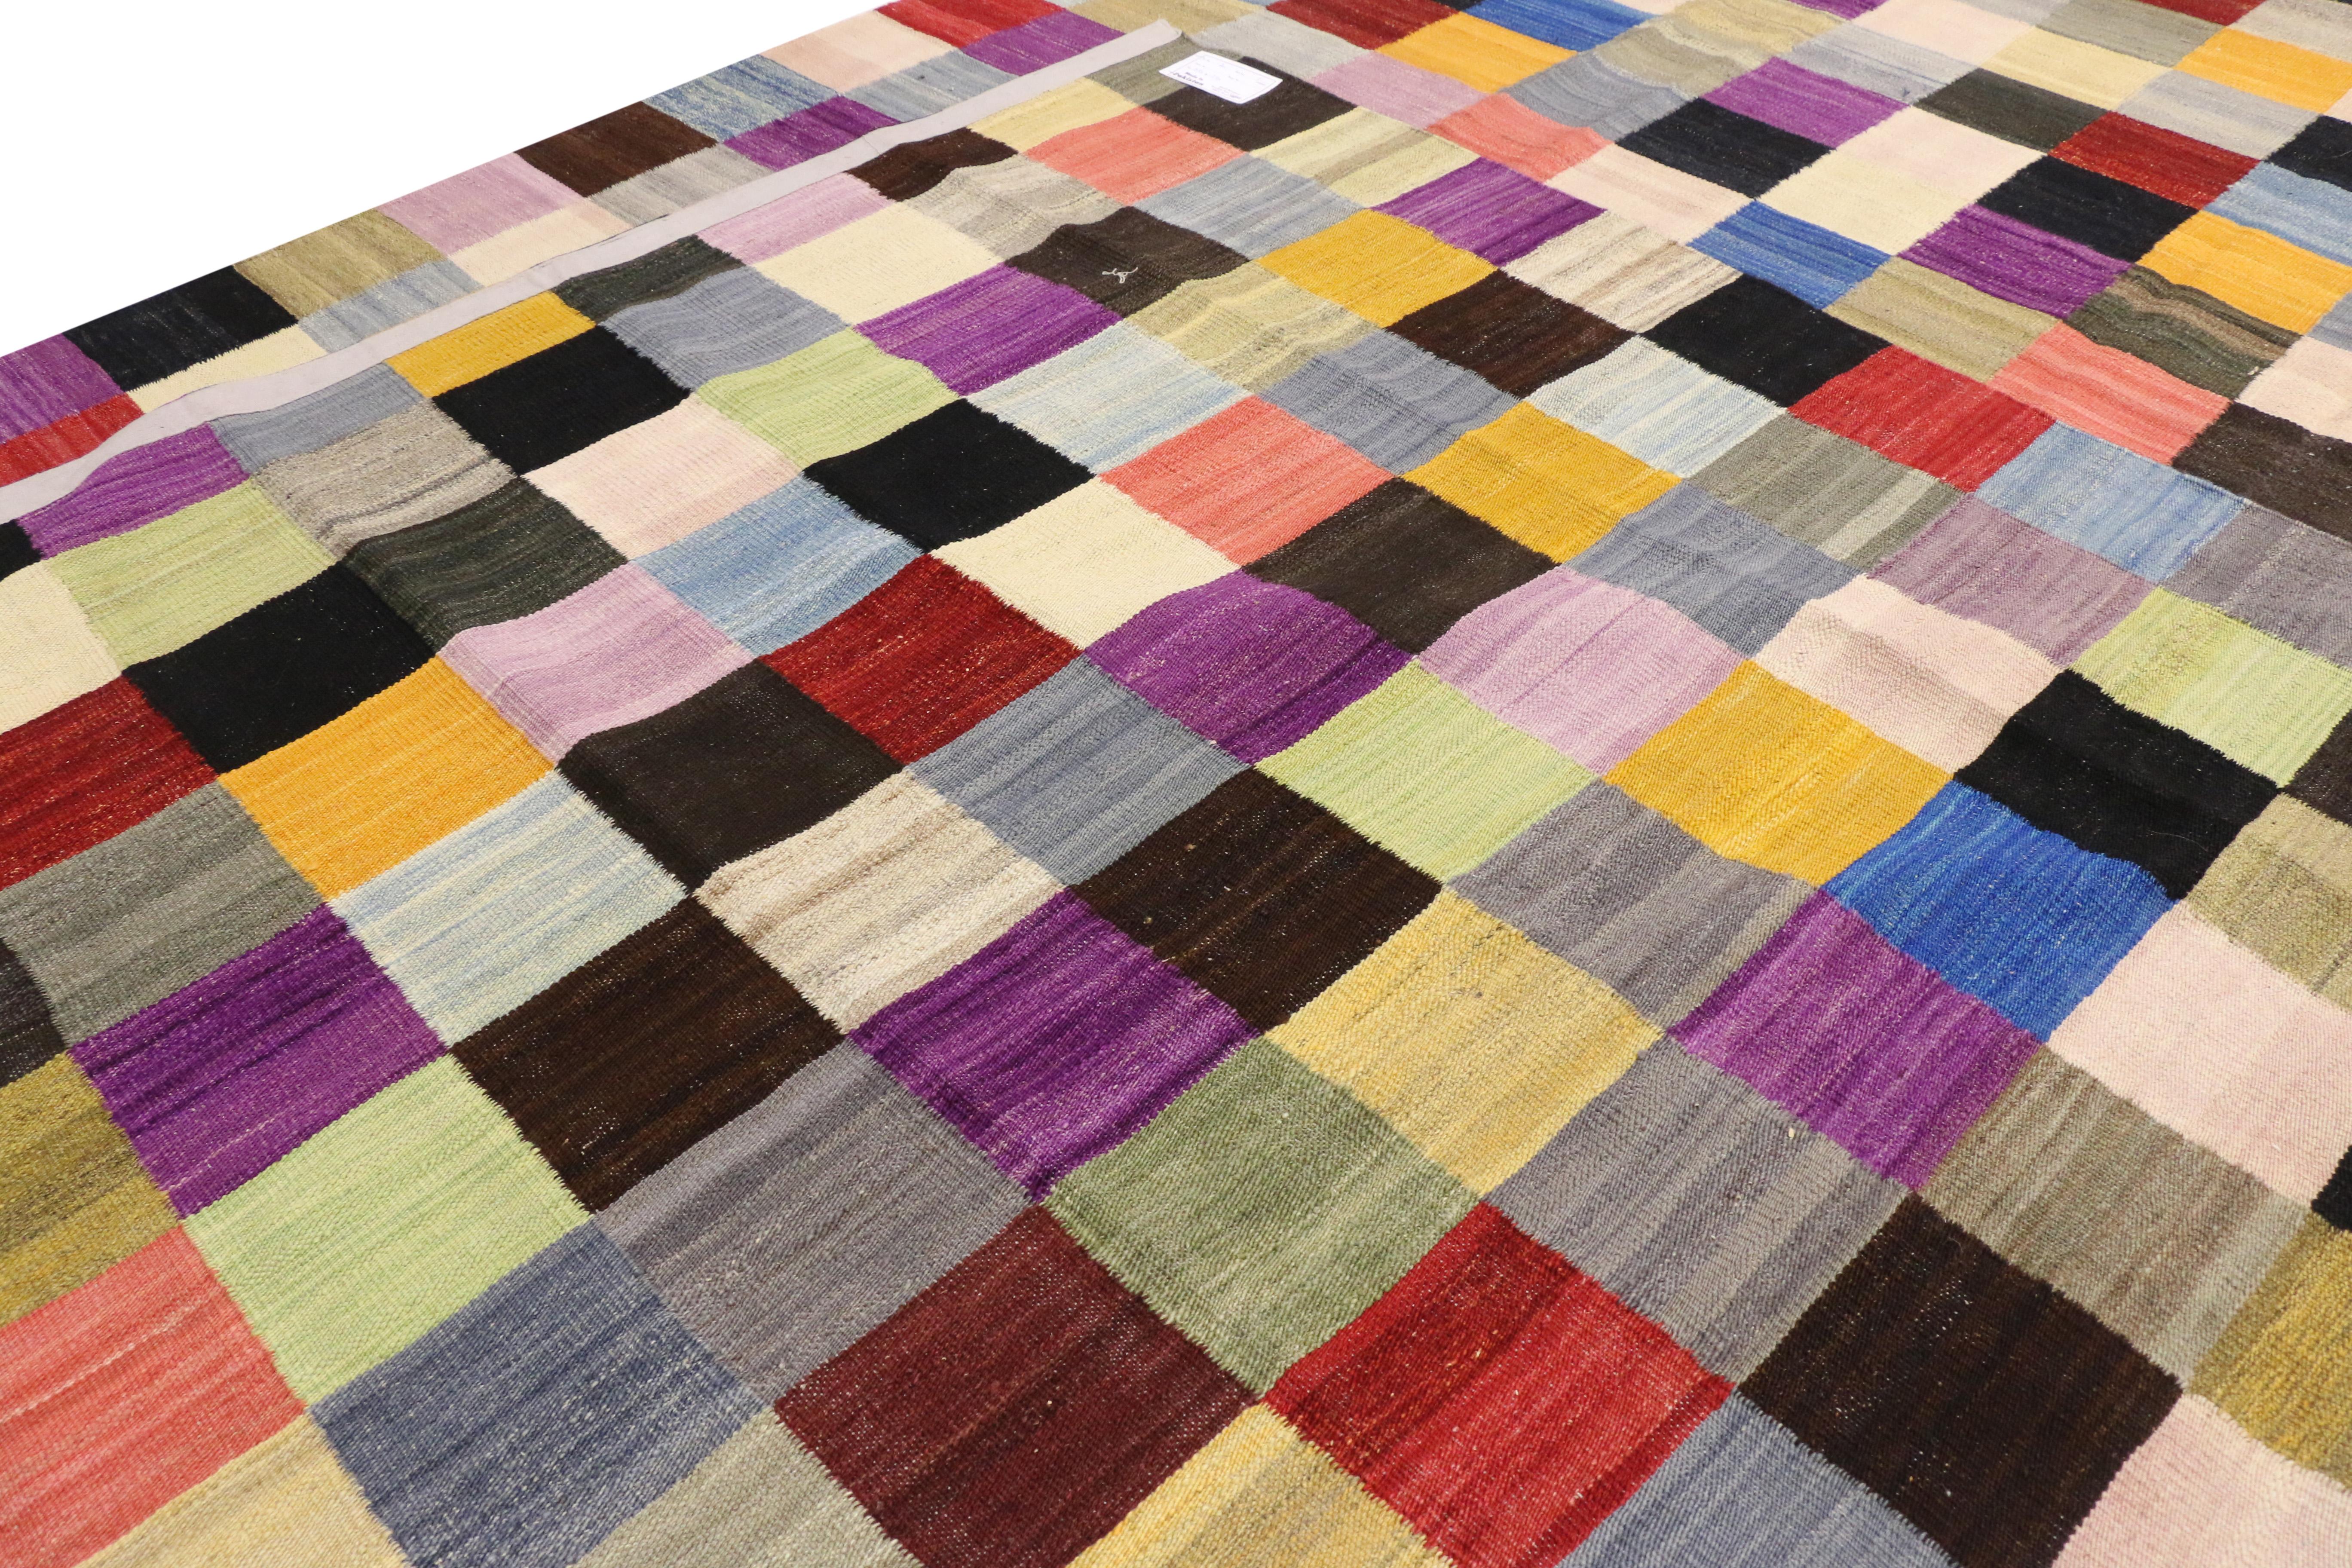 Hand-Woven Vintage Checkered Flatweave Carpet, Midcentury Modern Meets Cubist Style For Sale